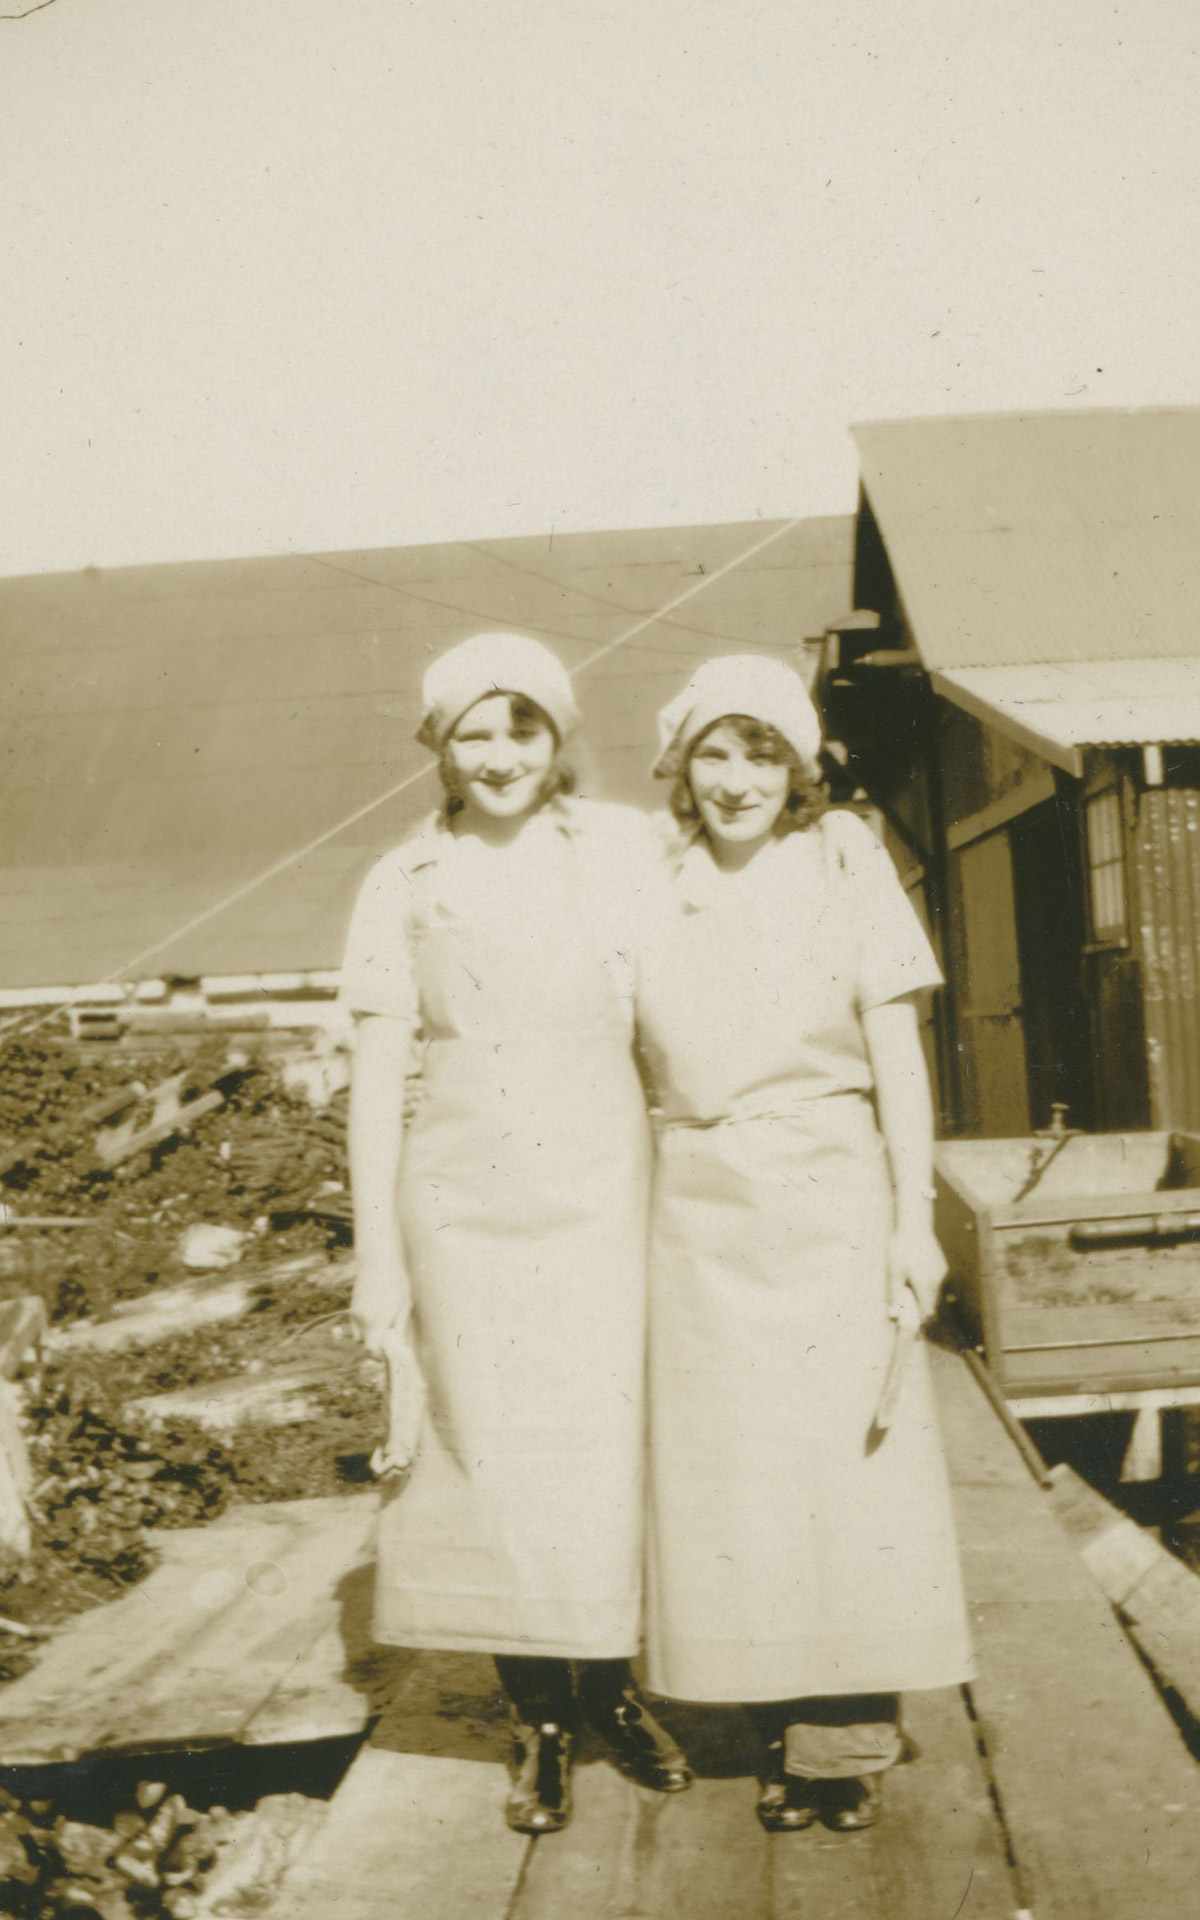 Two women in work uniforms pose in front of cannery buildings.